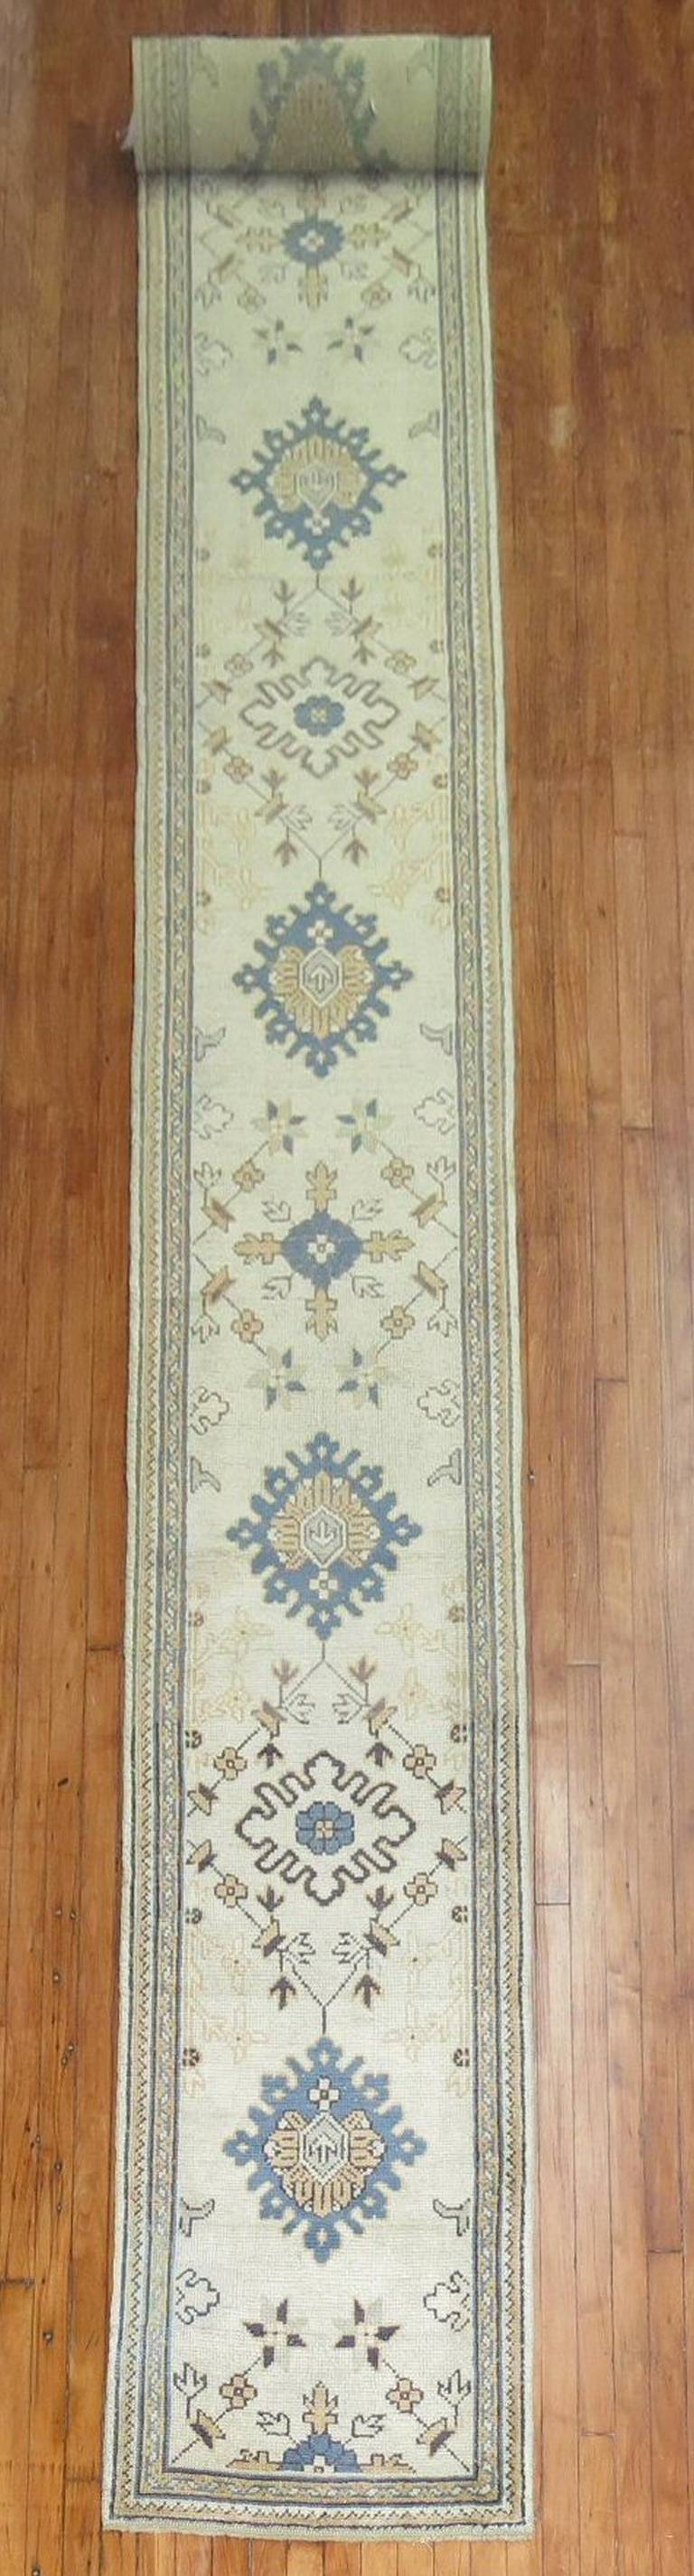 A long and narrow rare size early 20th century antique Oushak runner. Accents in blue, goldenrod soft green accents,

circa 1900-1910. Measures: 2'3'' x 22'4'.